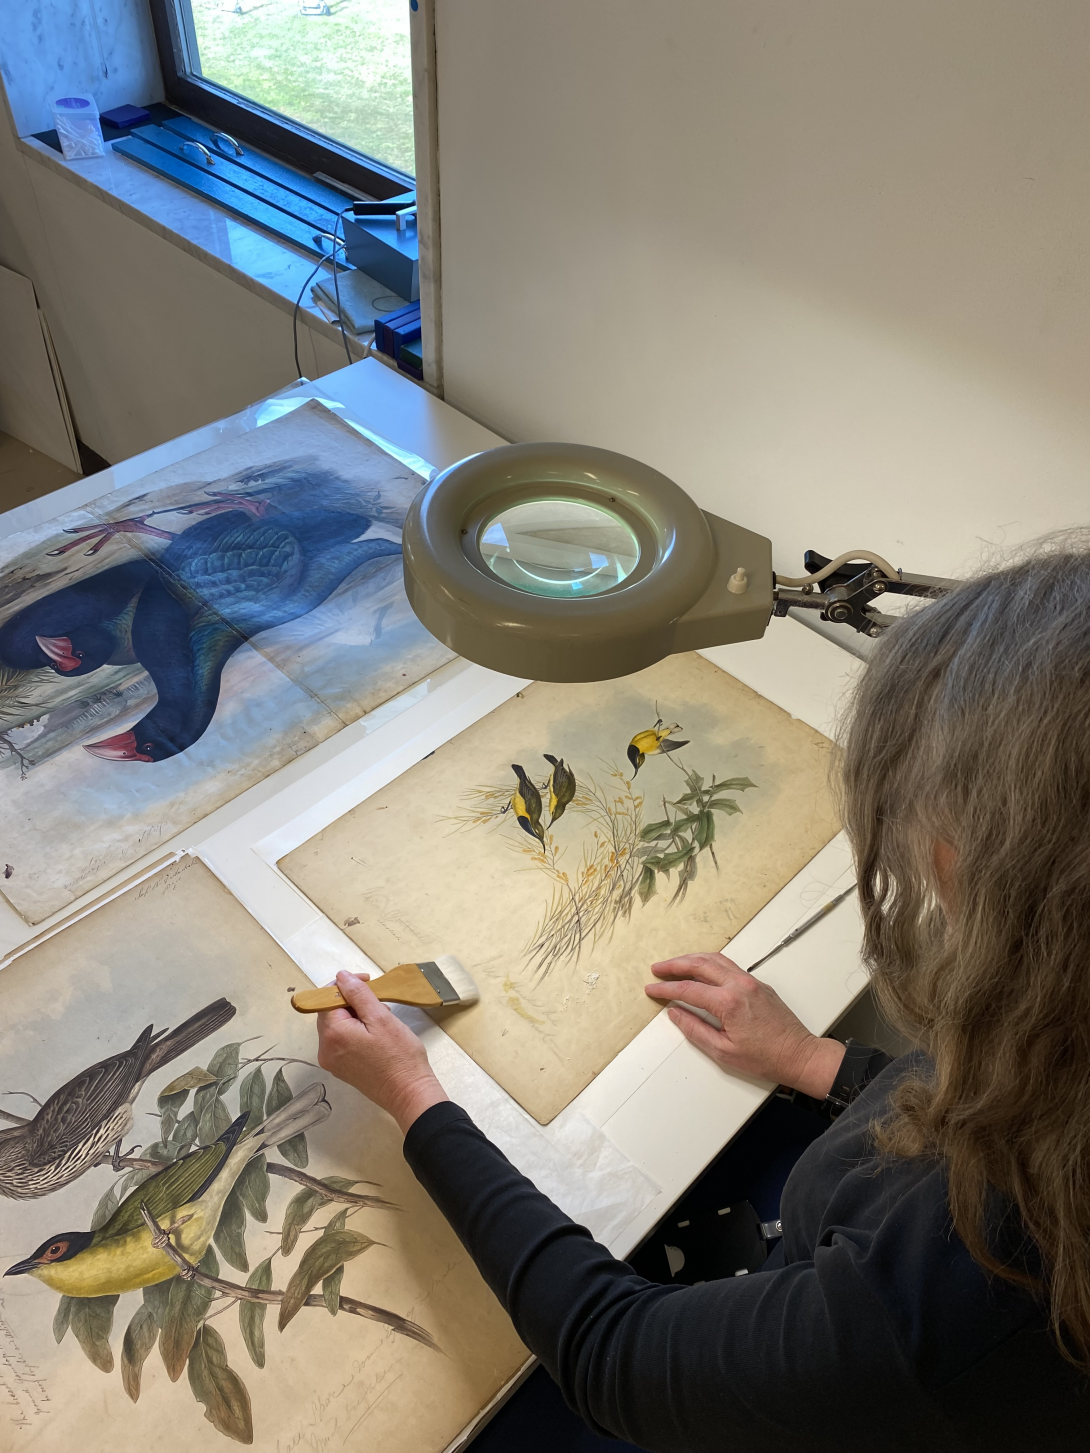 A woman with her back to the camera sits in front of a work bench, a paint brush in hand and a large magnifying glass on a stand next to her. Old prints with birds and nature on them sits on a table in front of her. 